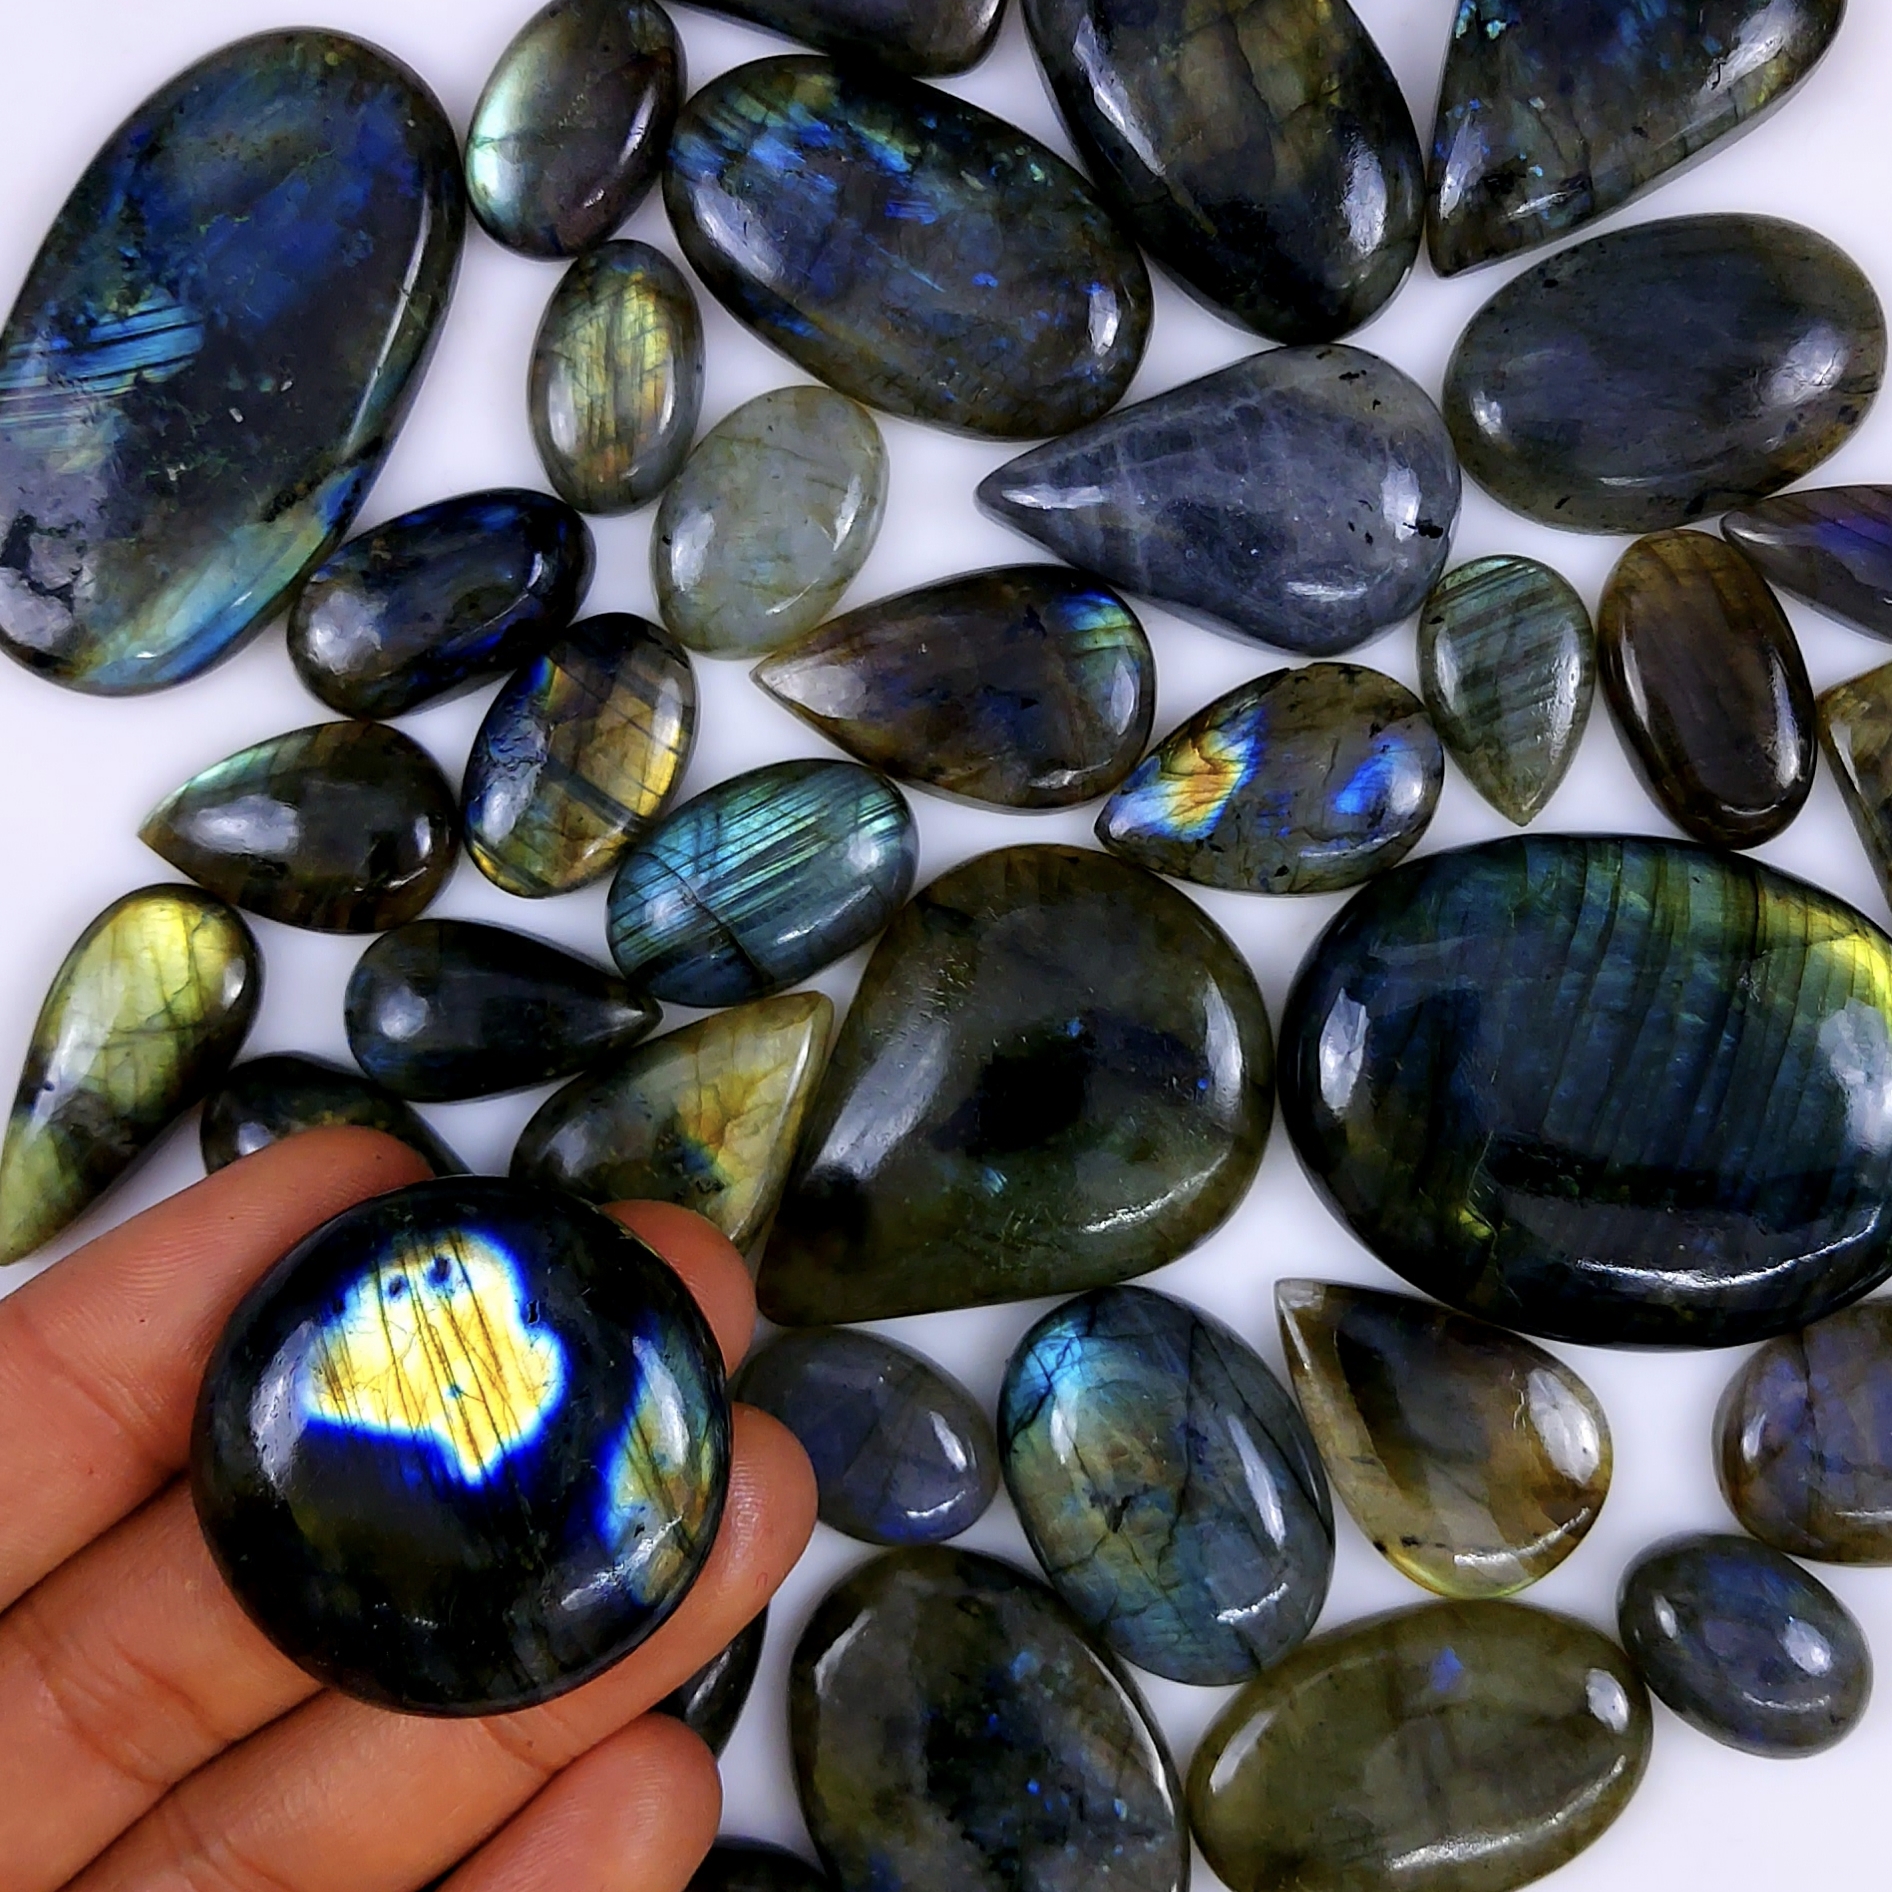 39pc 1570Cts Labradorite Cabochon Multifire Healing Crystal For Jewelry Supplies, Labradorite Necklace Handmade Wire Wrapped Gemstone Pendant 52x38 20x14mm#6308